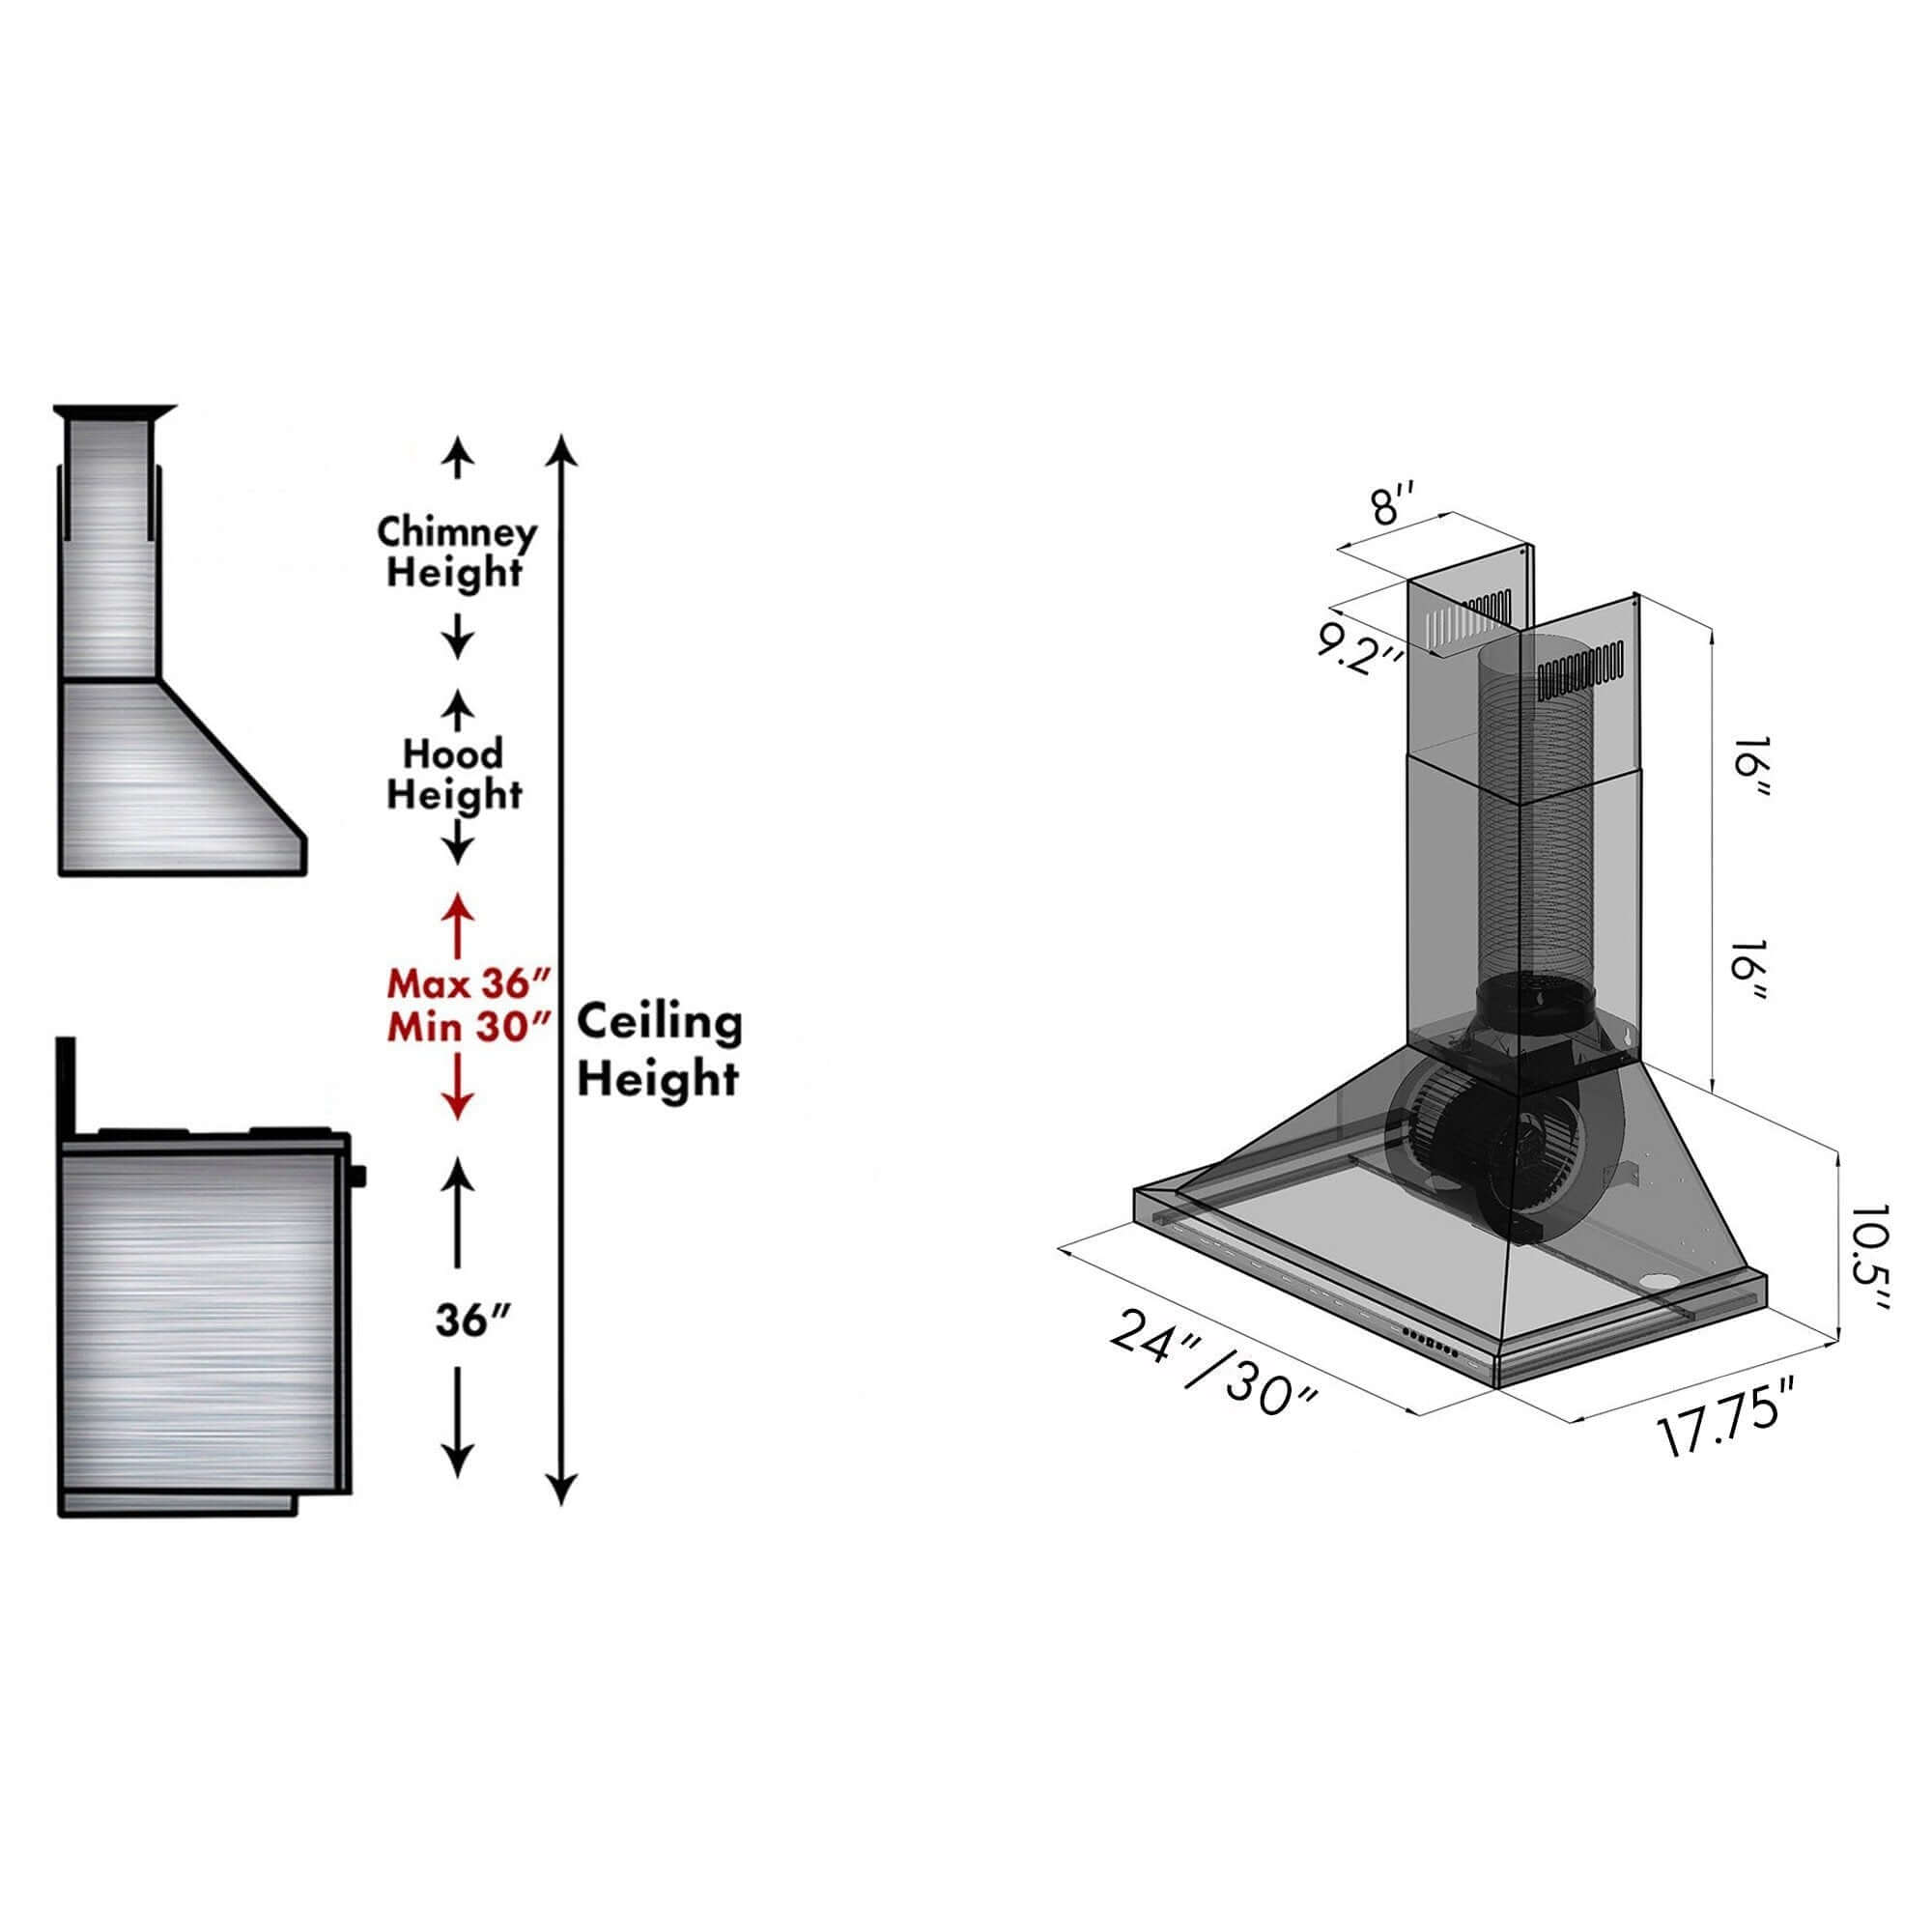 ZLINE Convertible Vent Wall Mount Range Hood in Stainless Steel (KB) Chimney Height Calculations